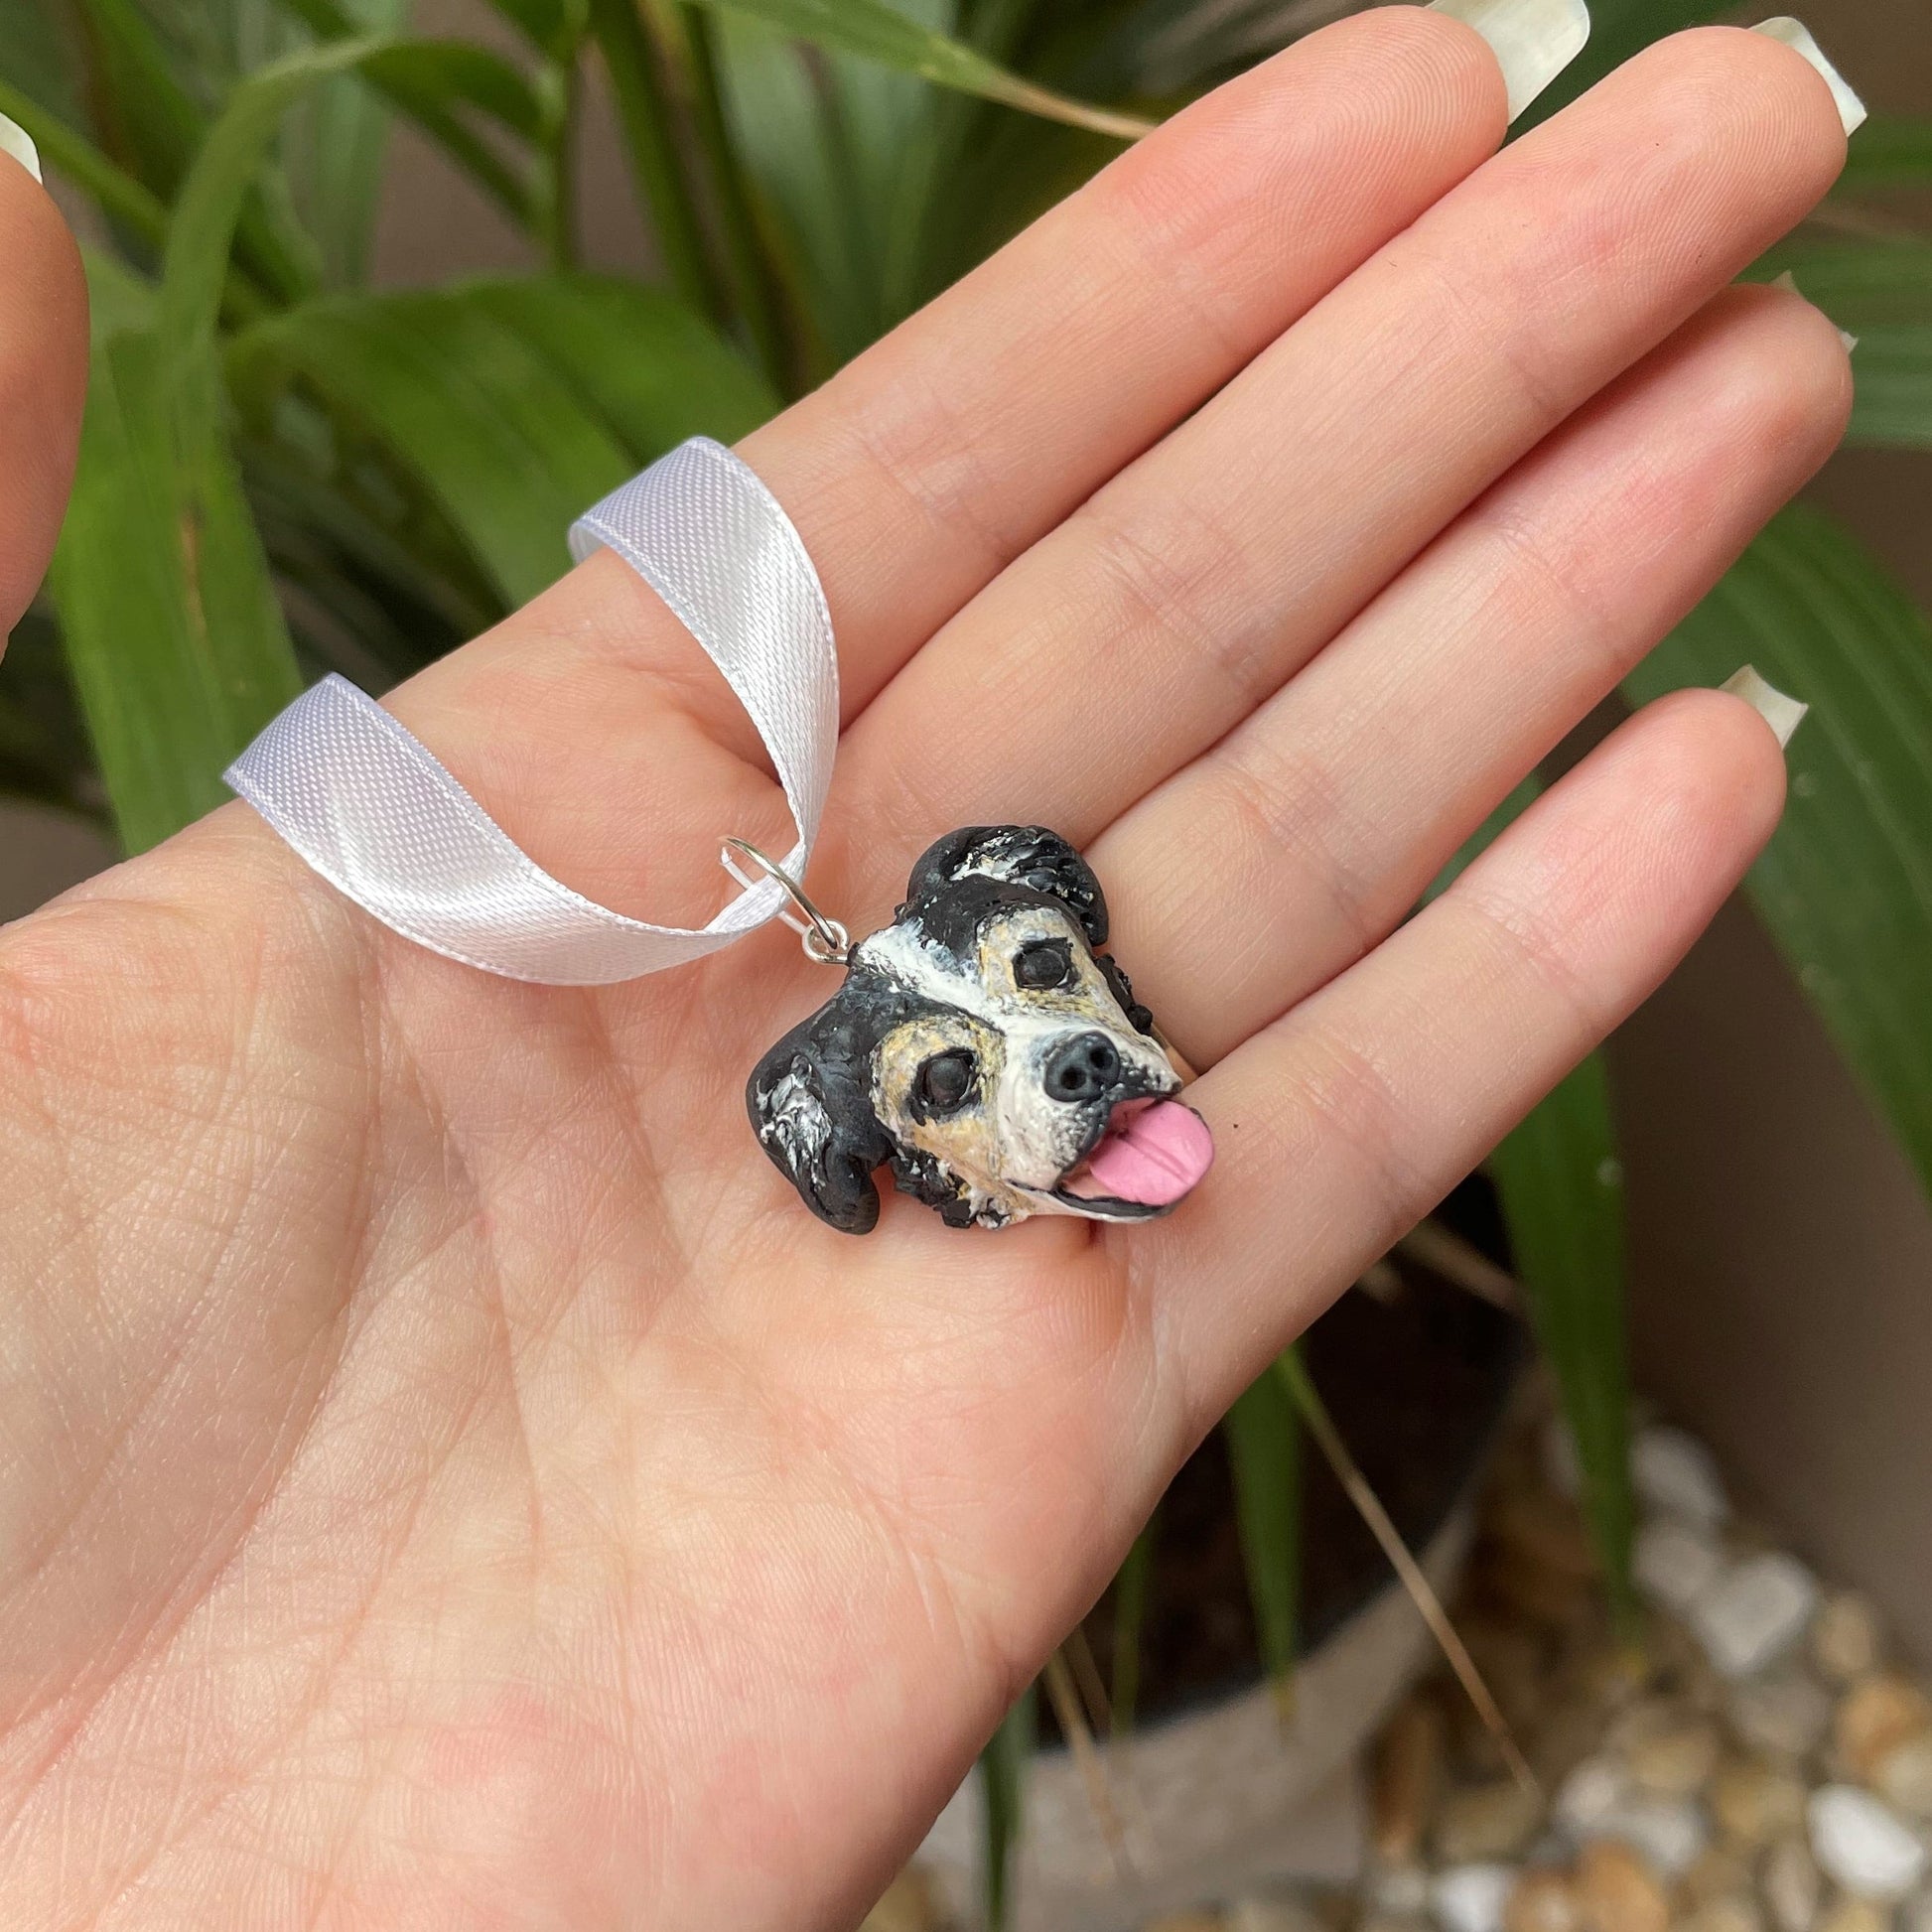 Handmade bouquet dog pendant on bouquet held over green palm plant background